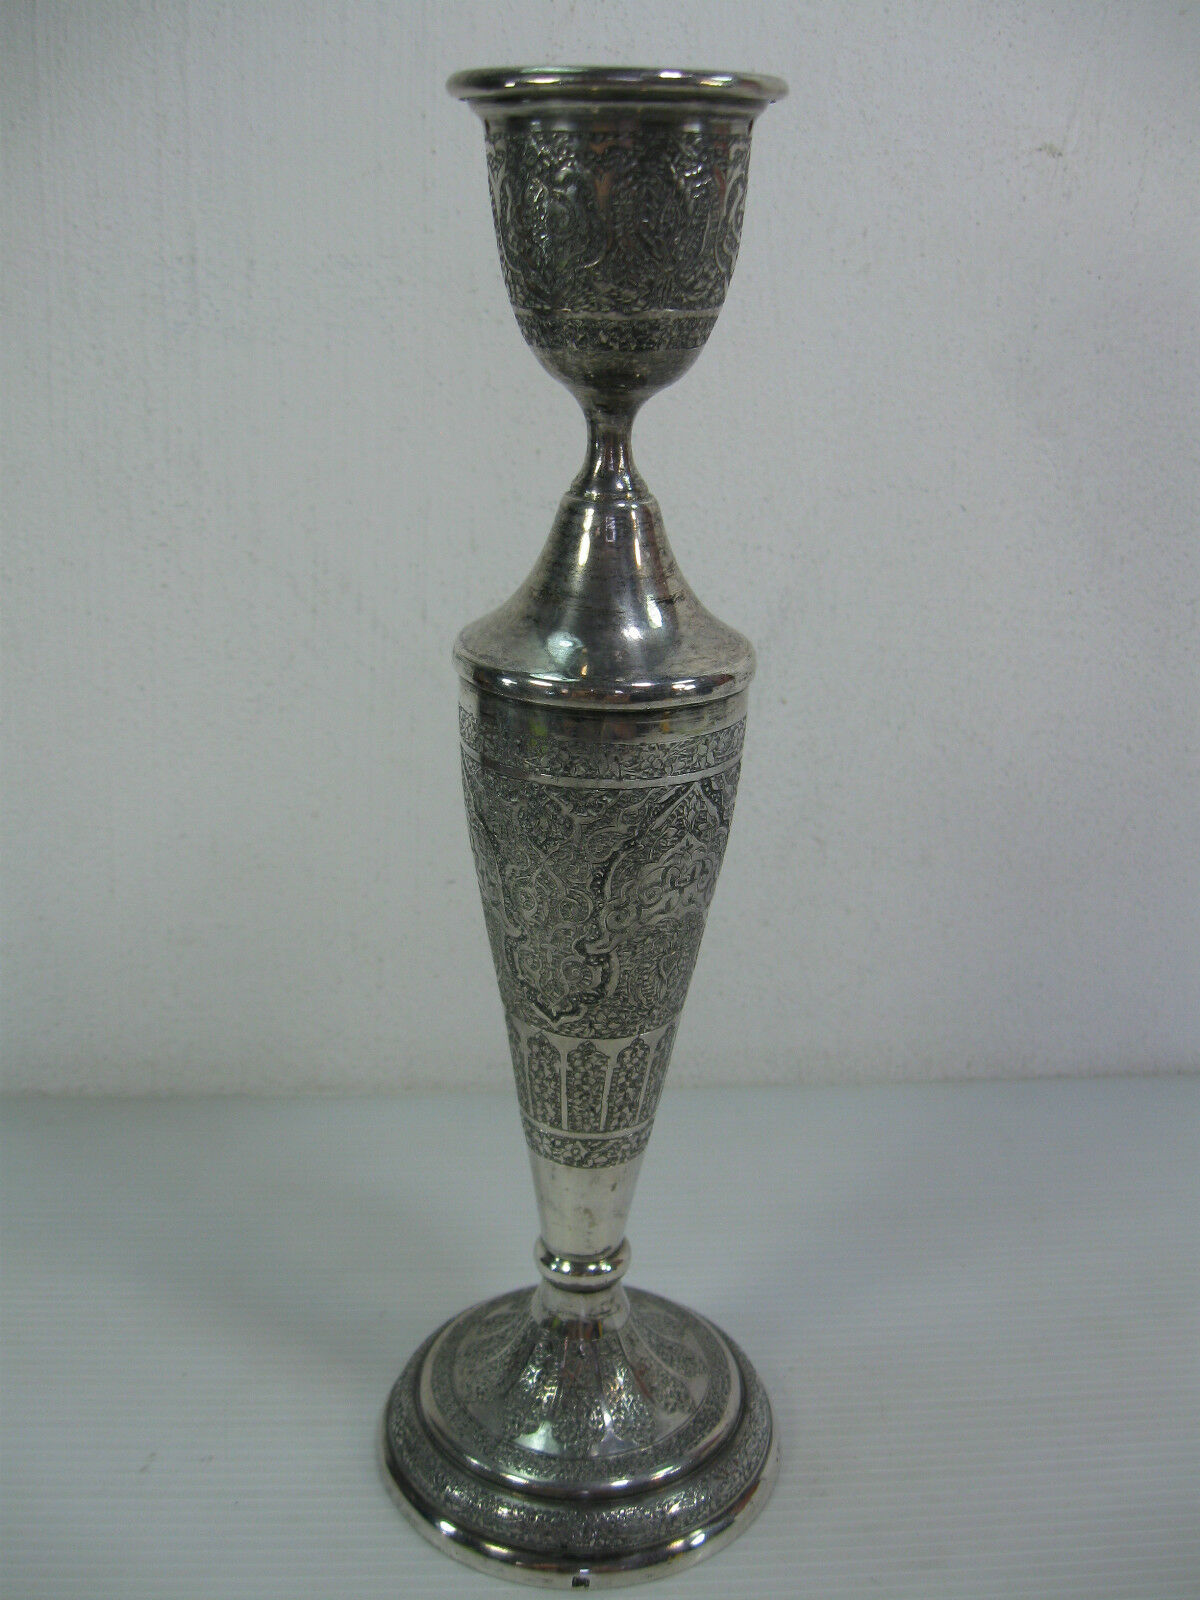 An Antique Silver Islamic Candle Stick Holder